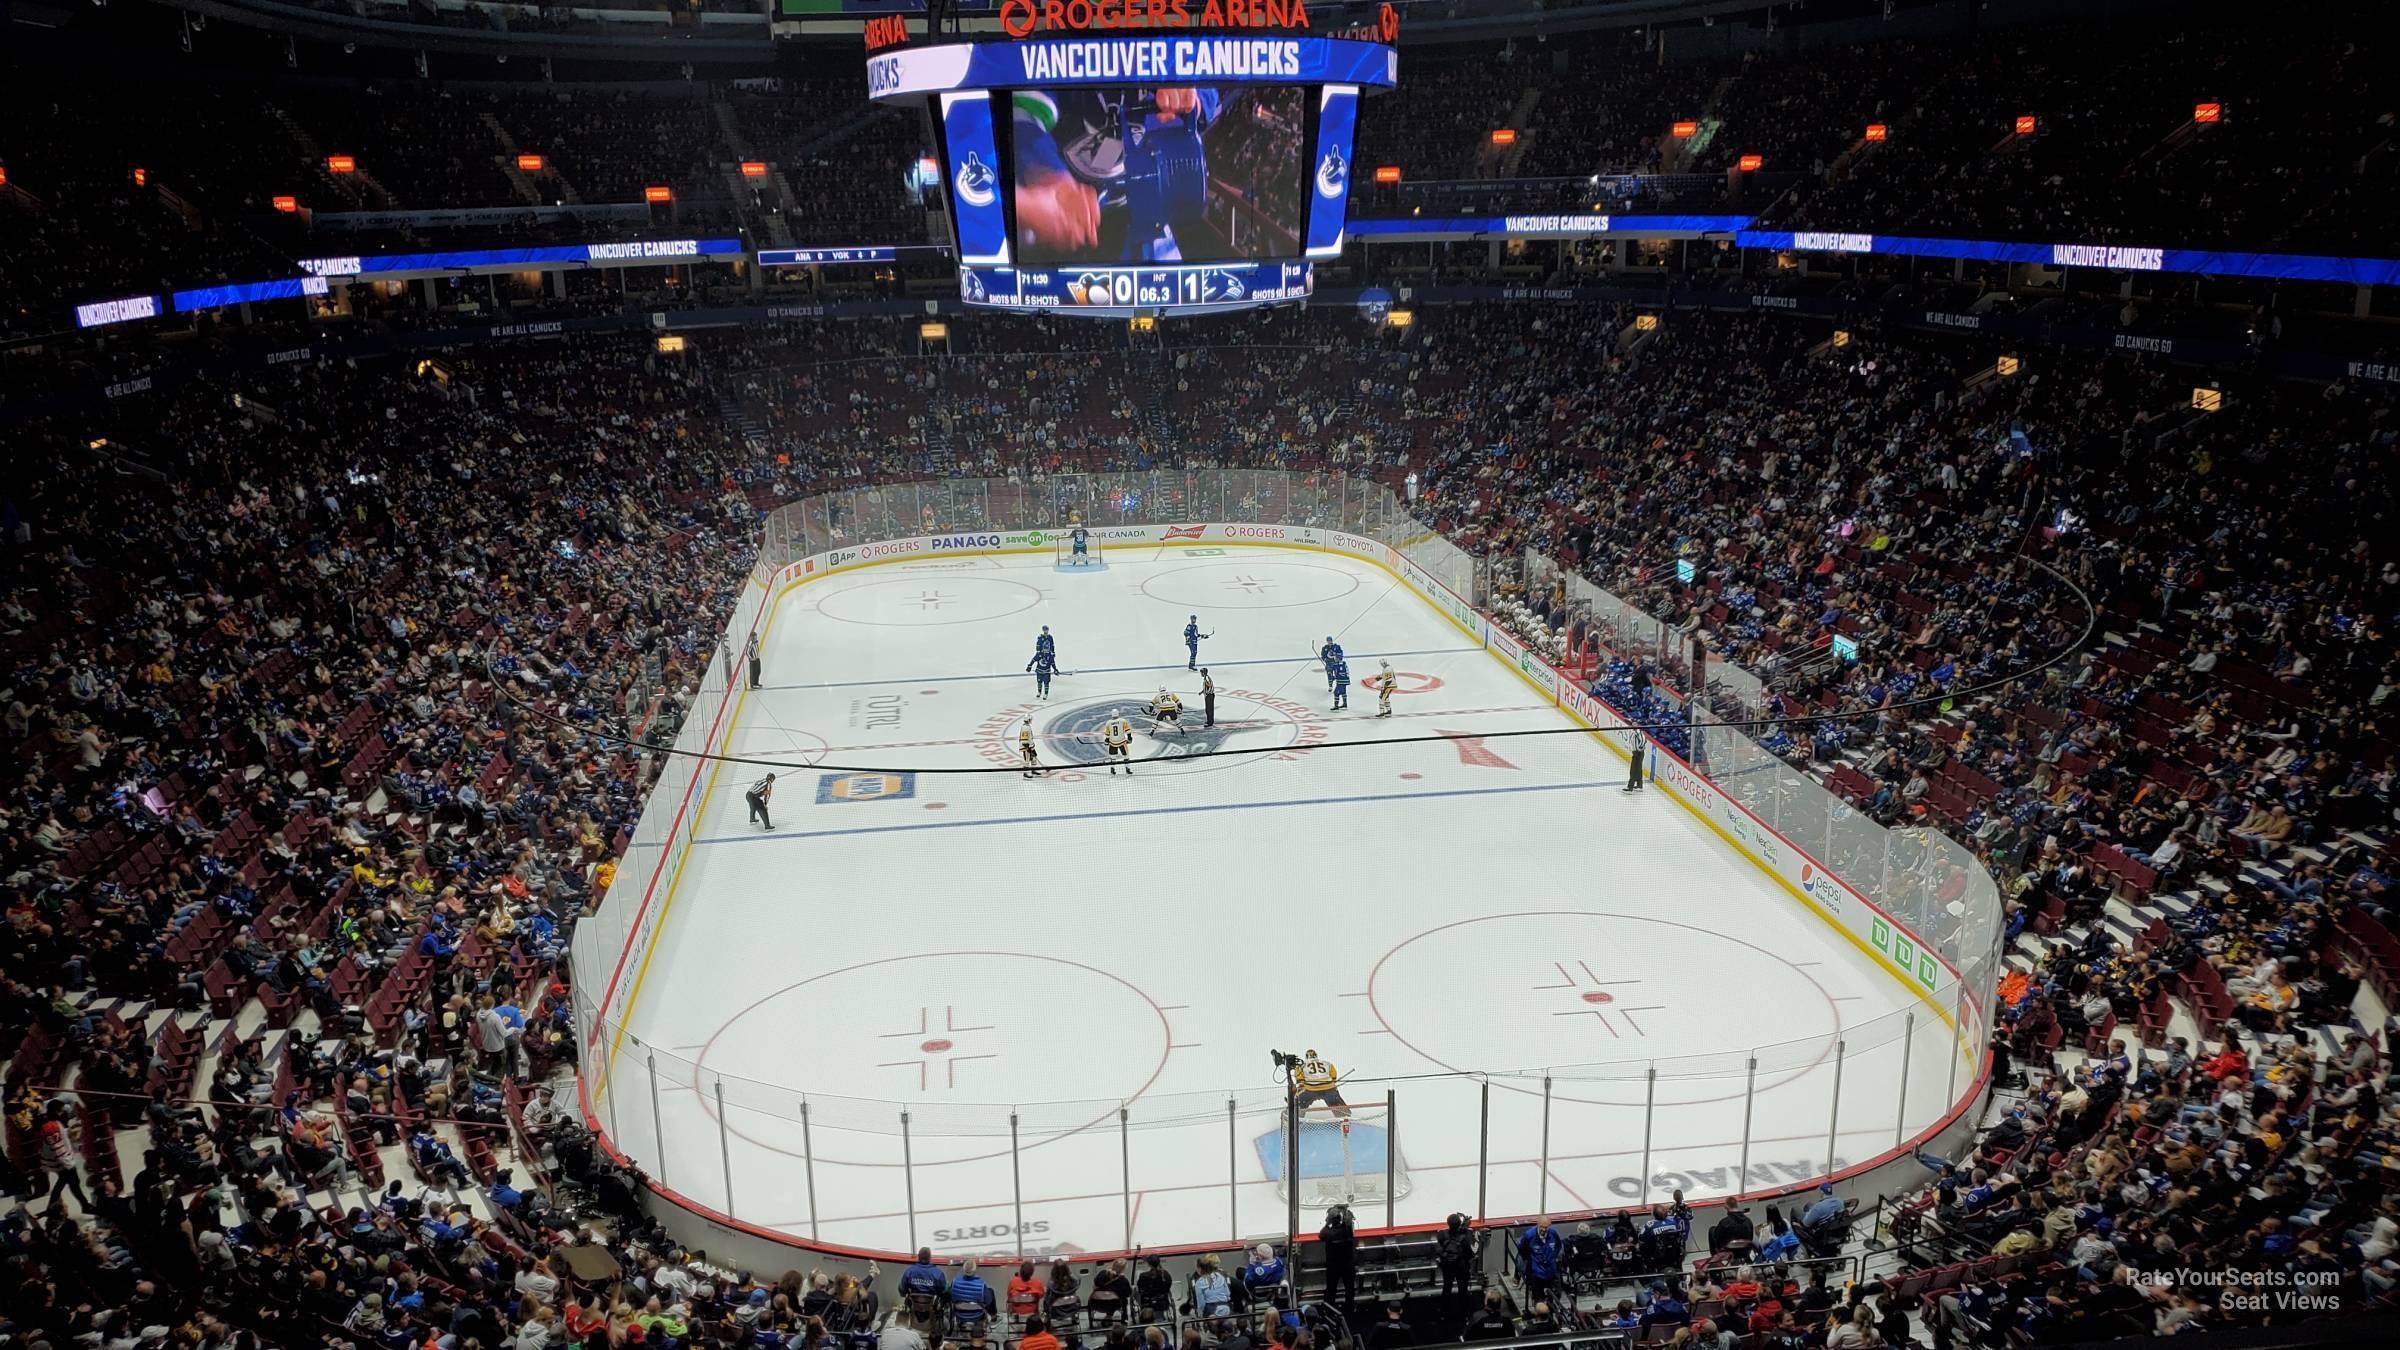 section 301, row 4 seat view  for hockey - rogers arena